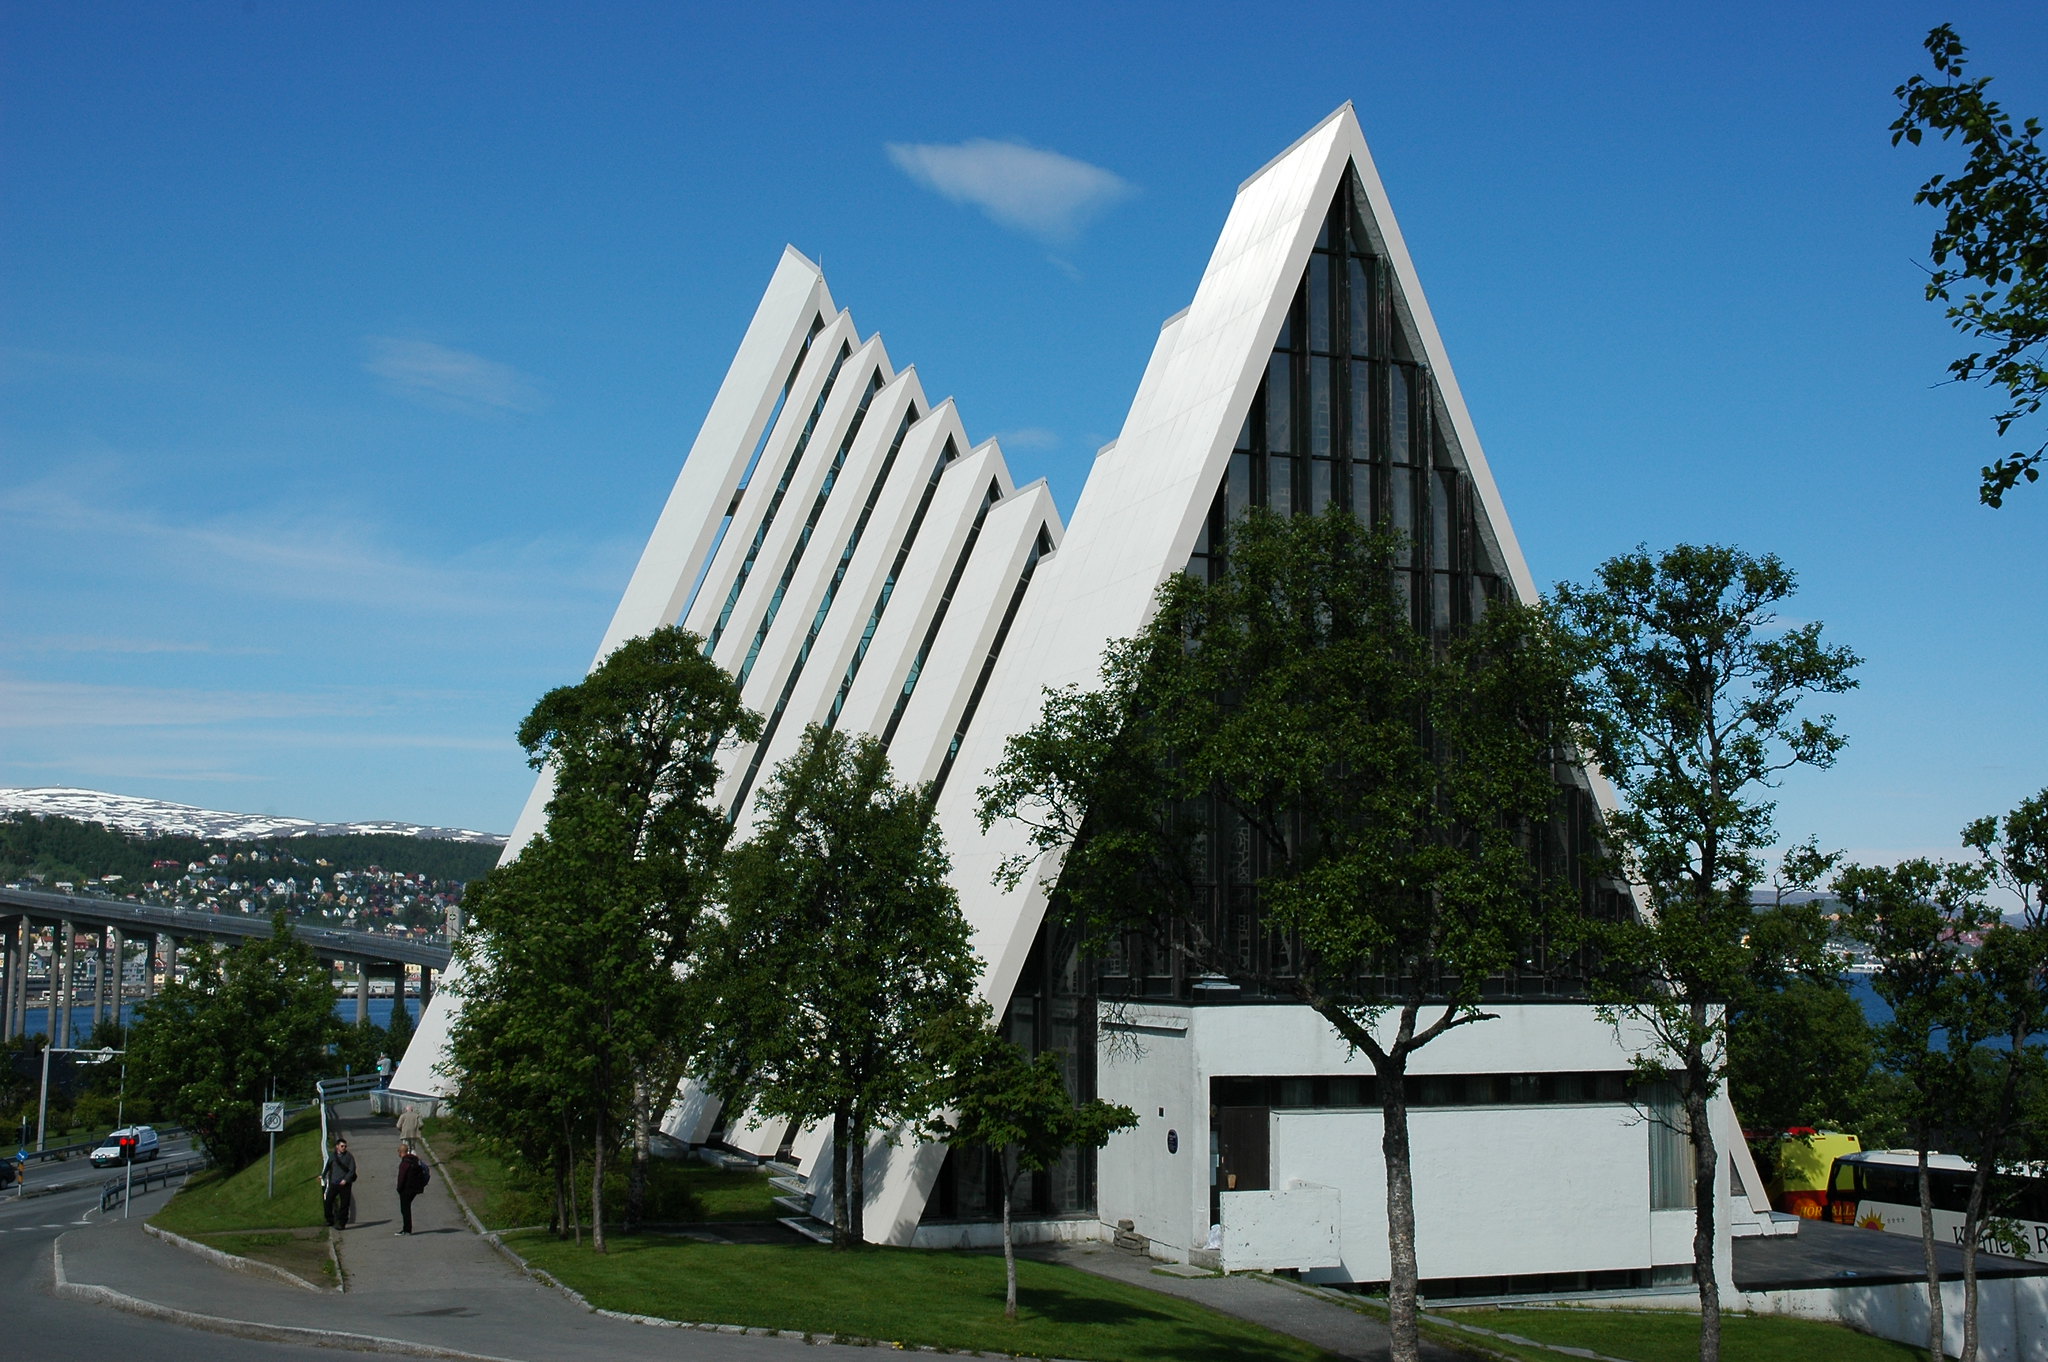 Norway Tromso The Artic Cathedral Architecture Building Sky Clouds Trees Road Bridge Grass 2048x1362